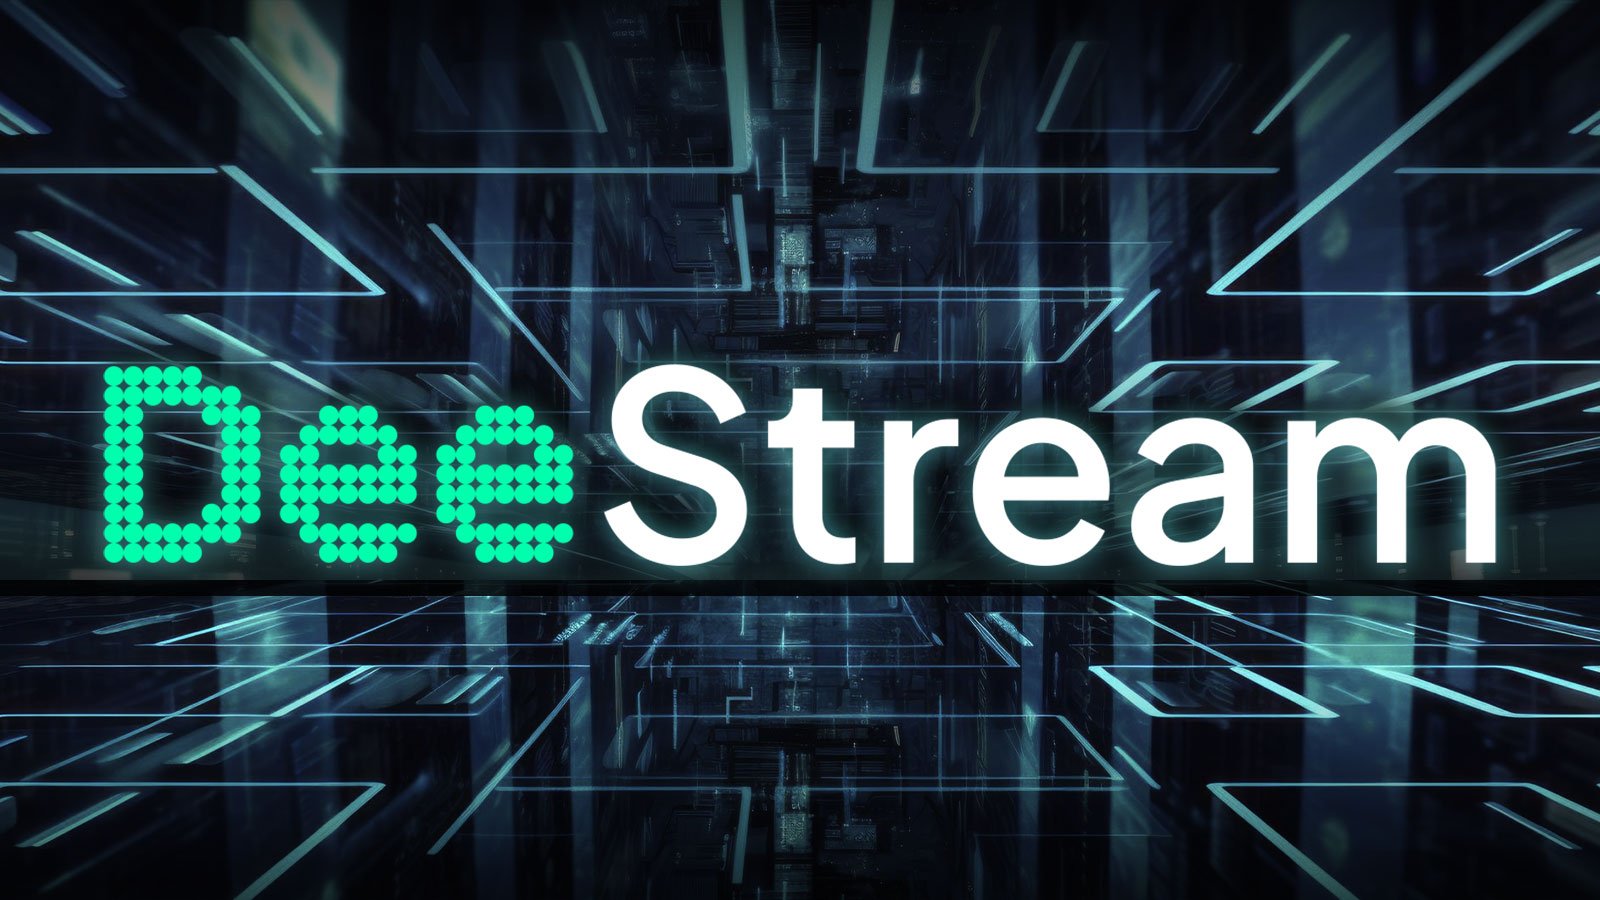 DeeStream (DST) Presale Gaining Mainstream Visibility in Q1, as Ethereum (ETH) and Cardano (ADA) Benefit From Starting Rally